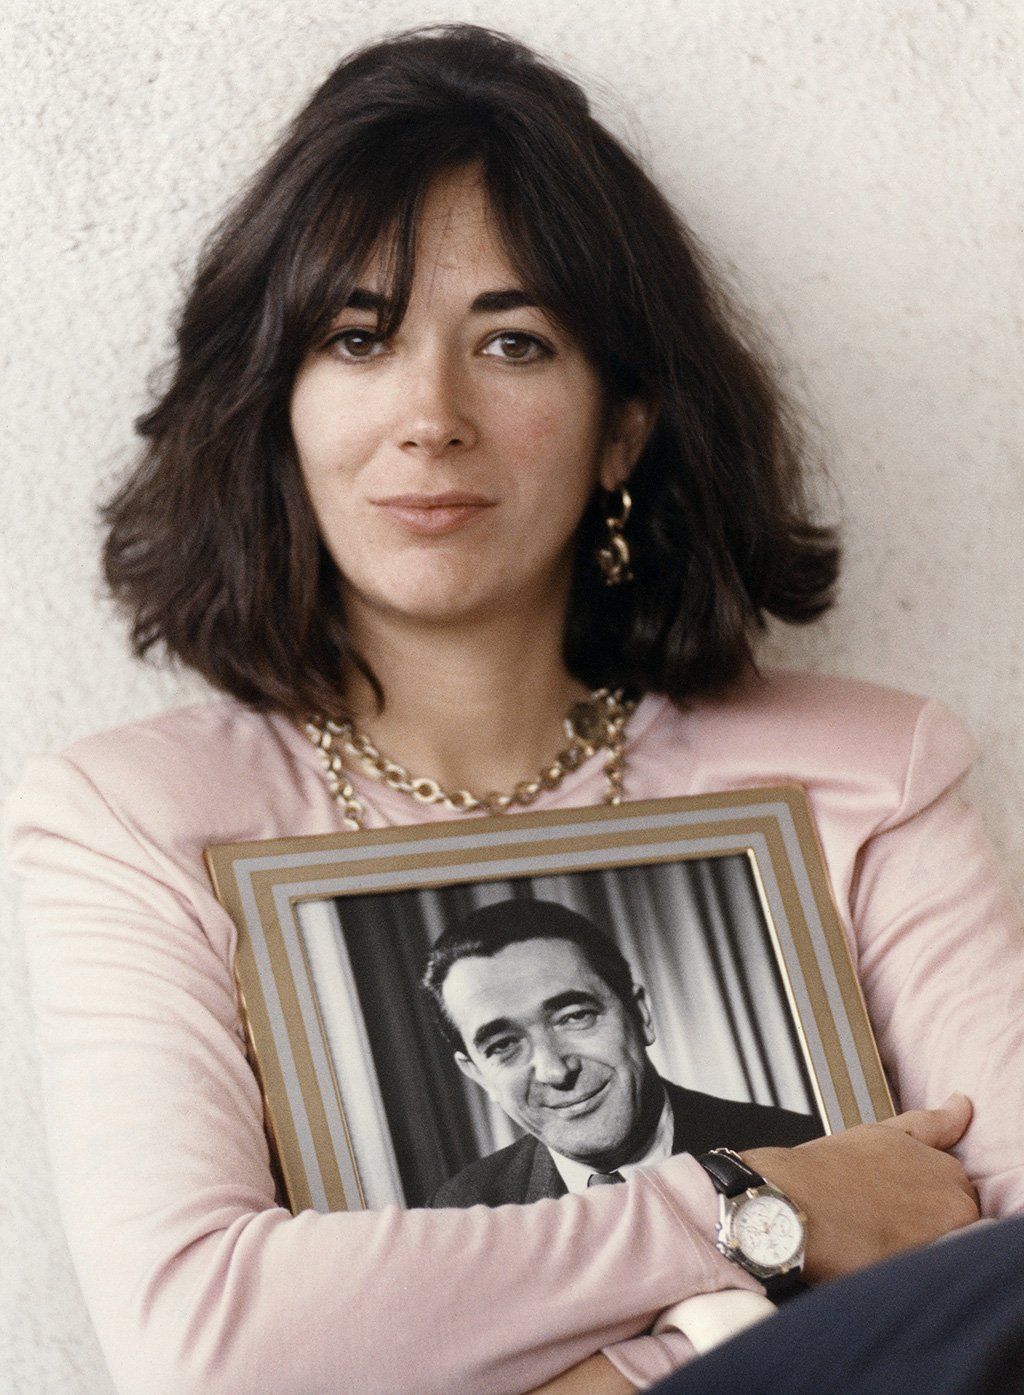 Ghislaine Maxwell, holding a framed photograph of her late father in Jerusalem, 1991